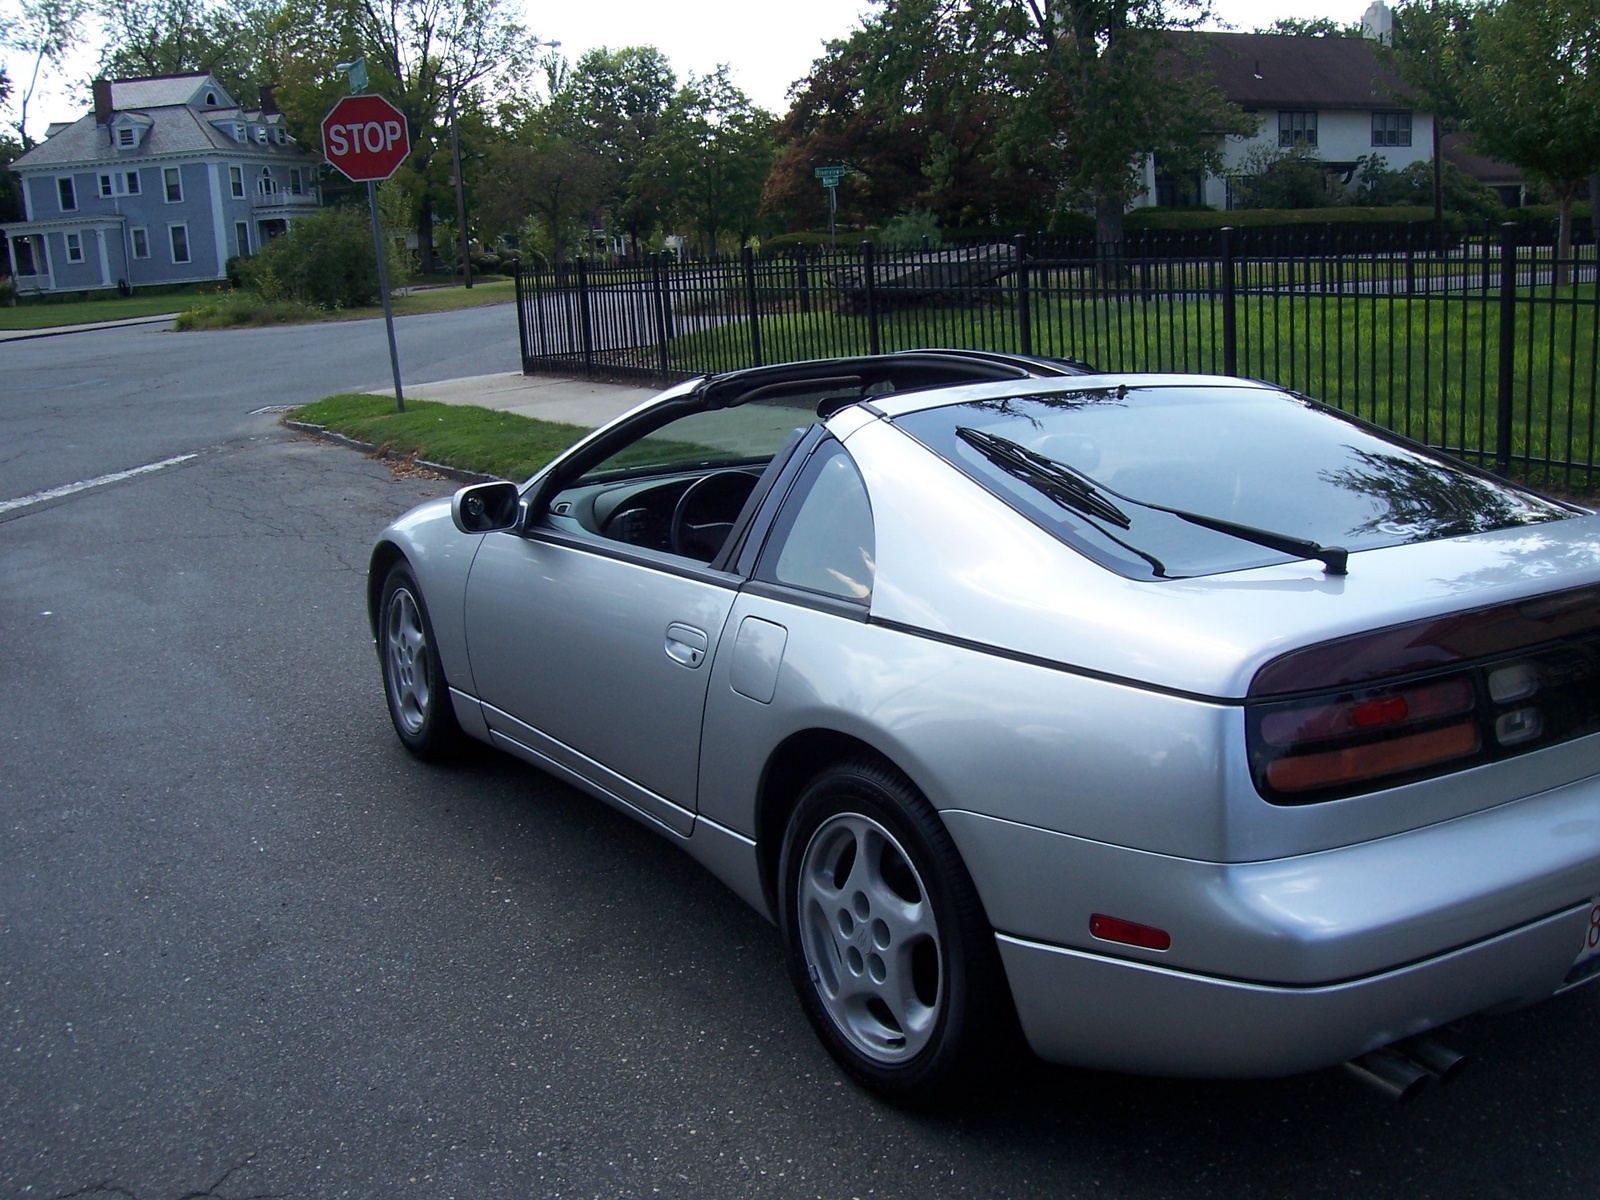 1990 300Zx nissan picture #1